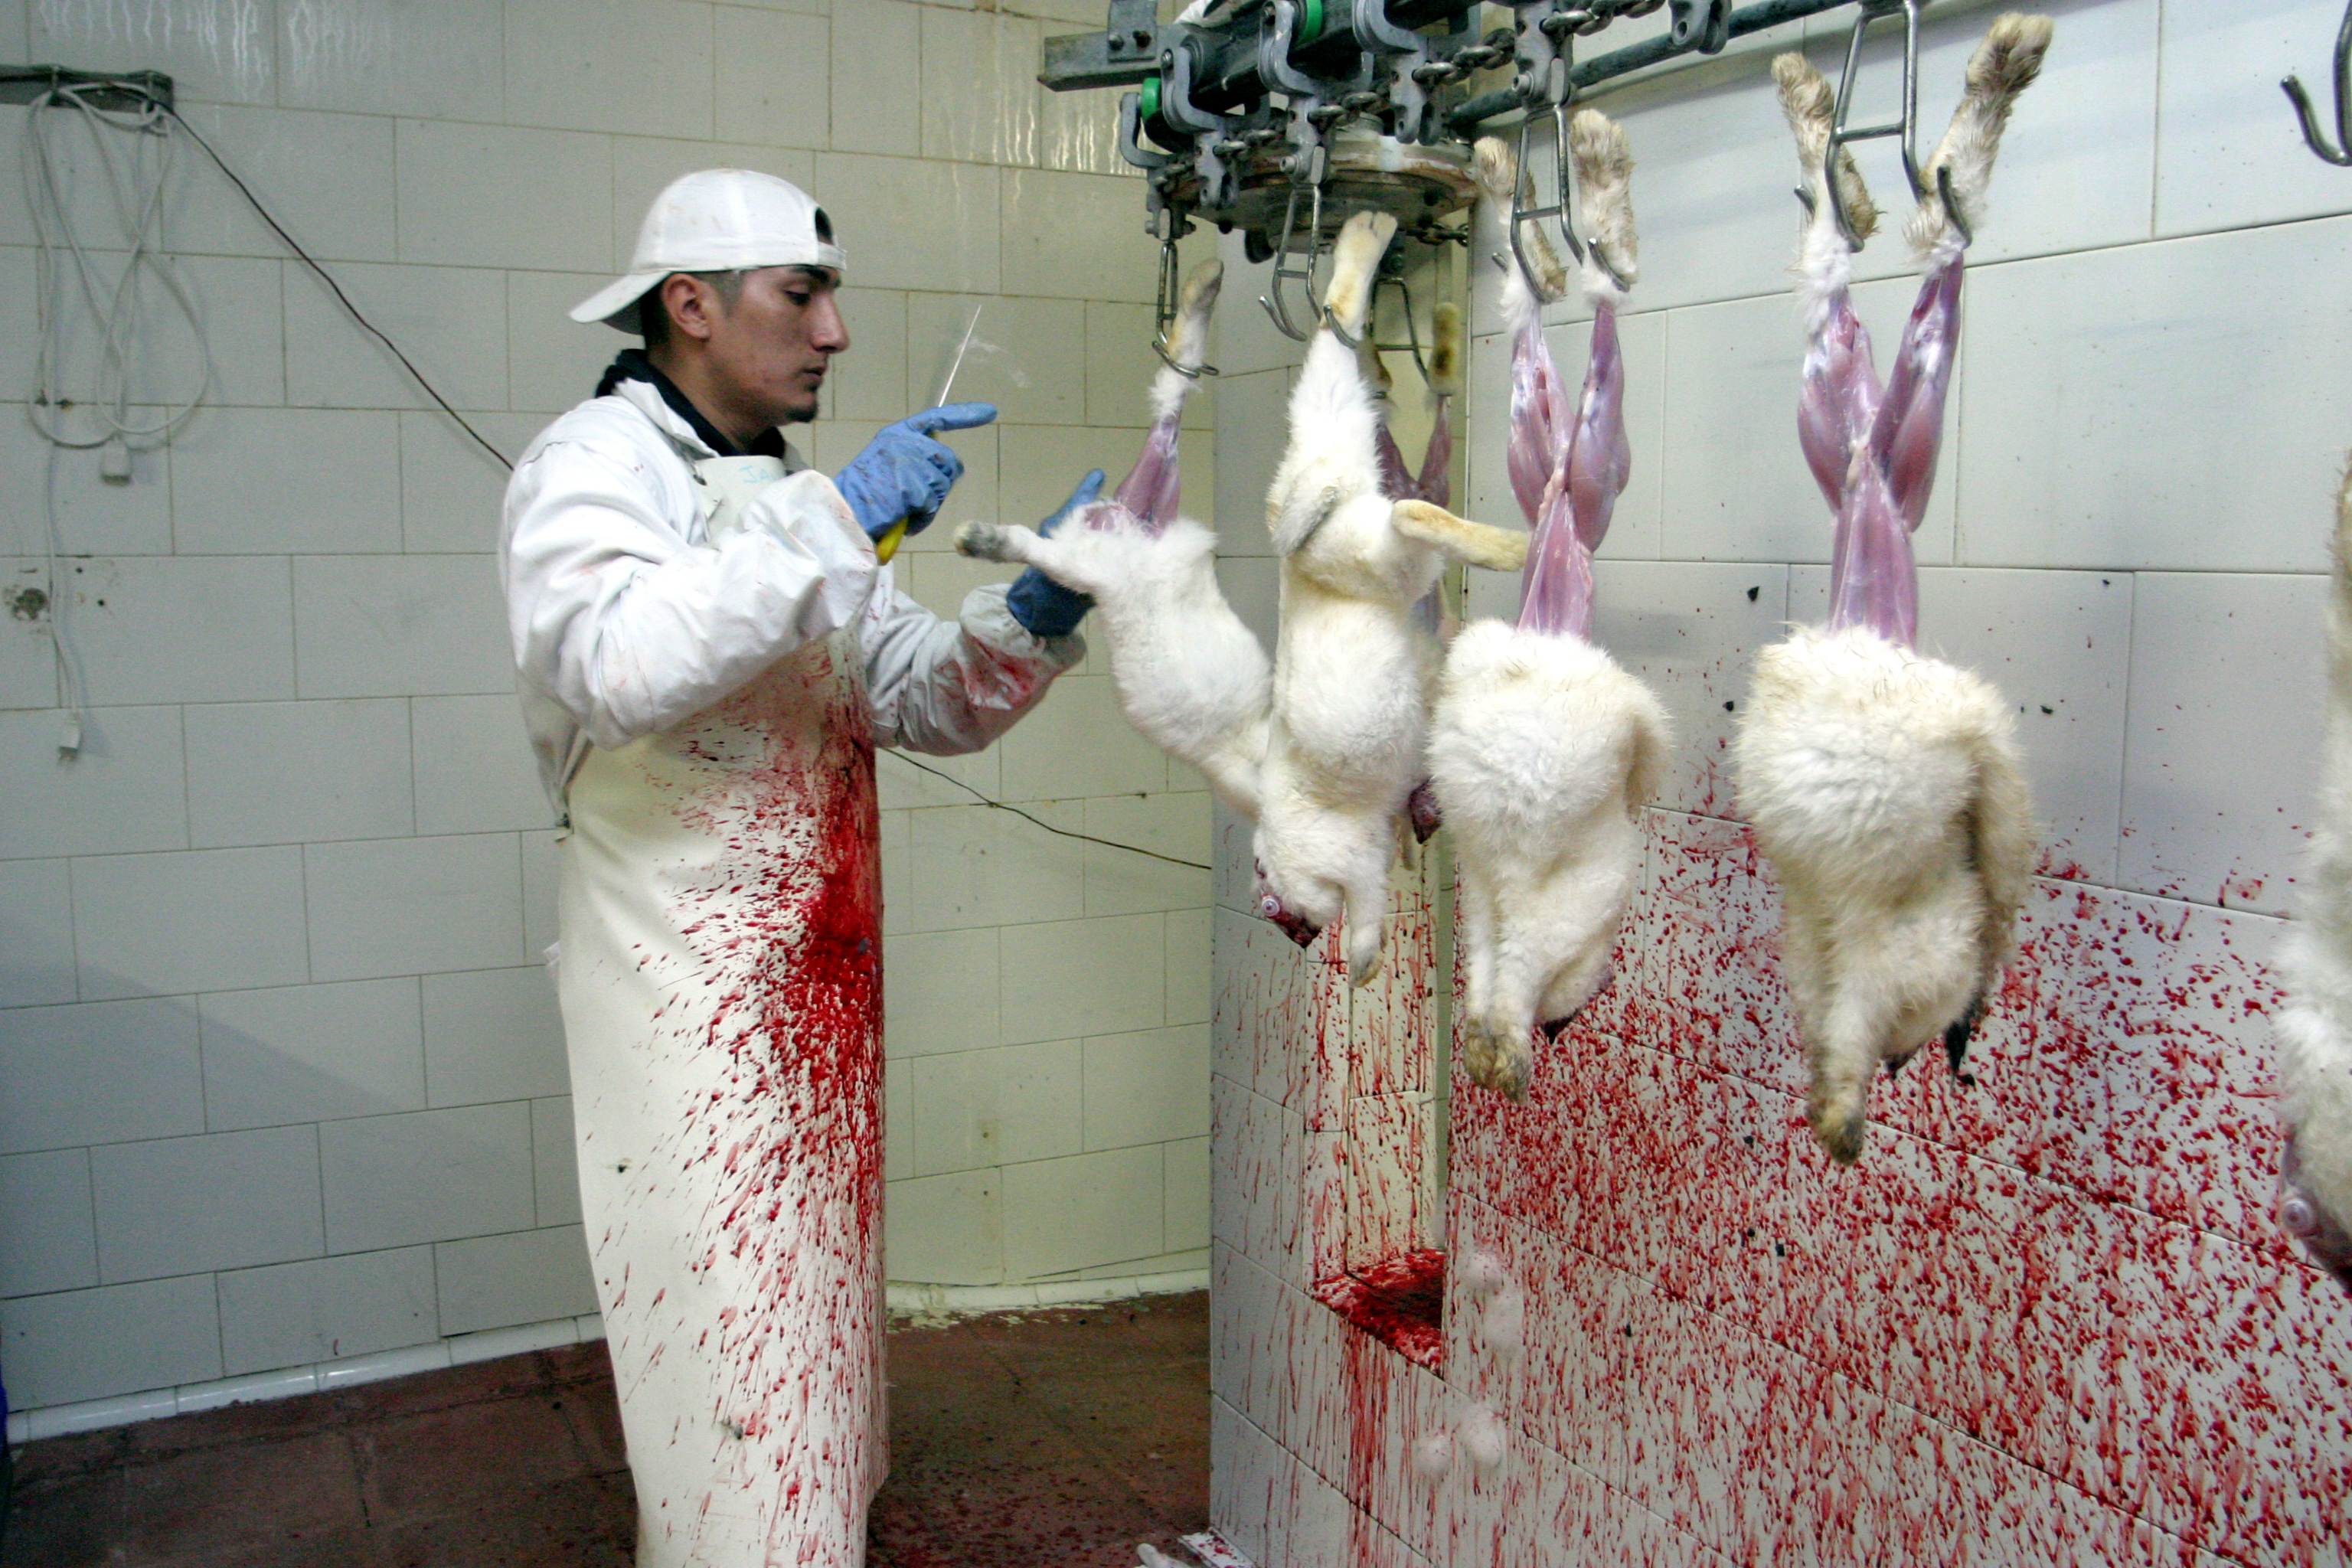 Animal Aid & PETA Petition For CCTV in . Slaughterhouses - Their Turn